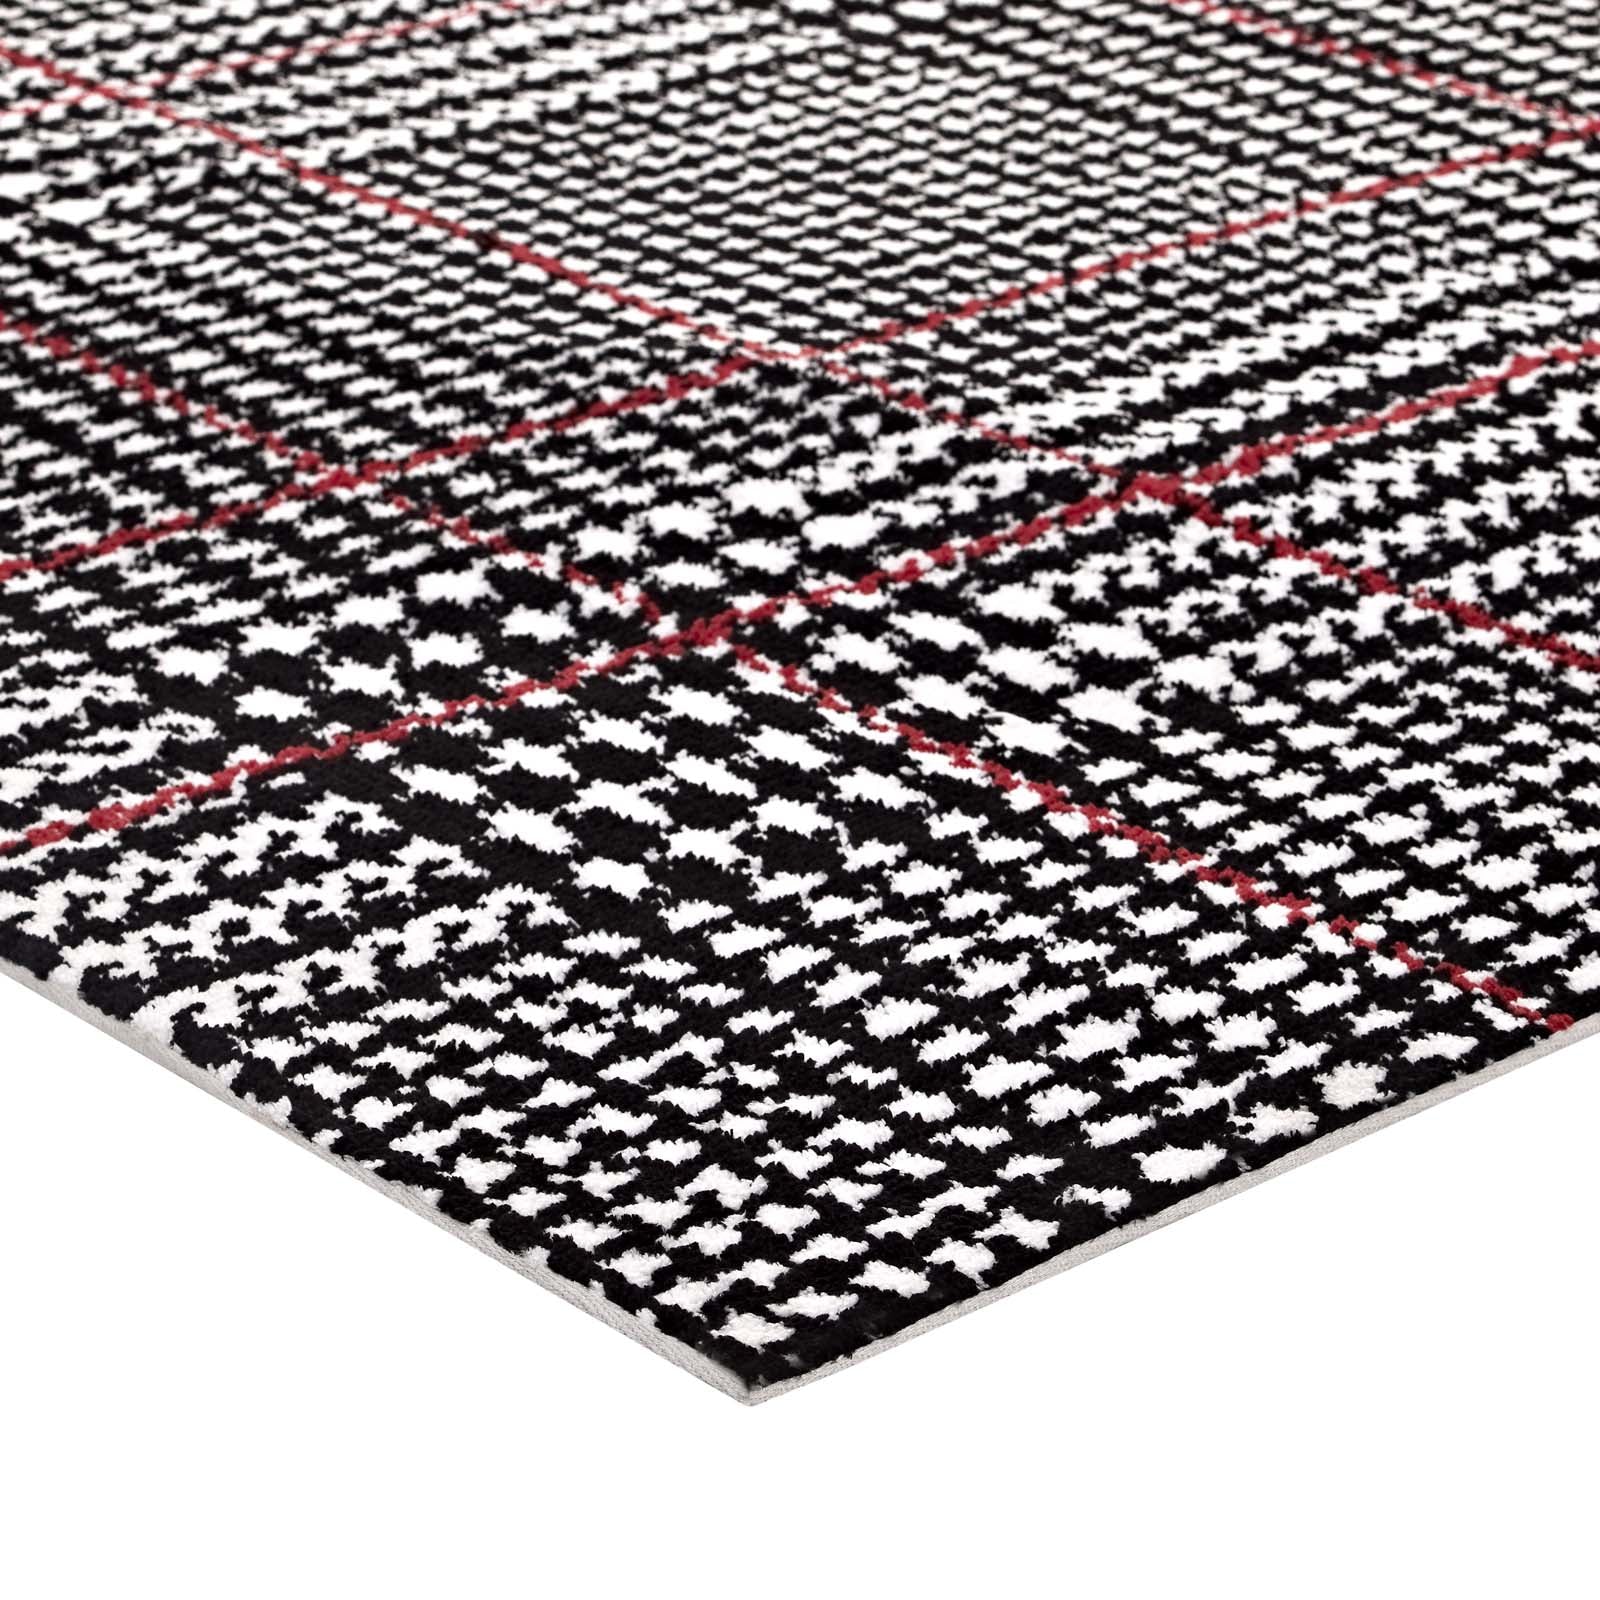 Modway Indoor Rugs - Kaja Abstract Plaid 5x8 Area Rug Ivory, Black & Red